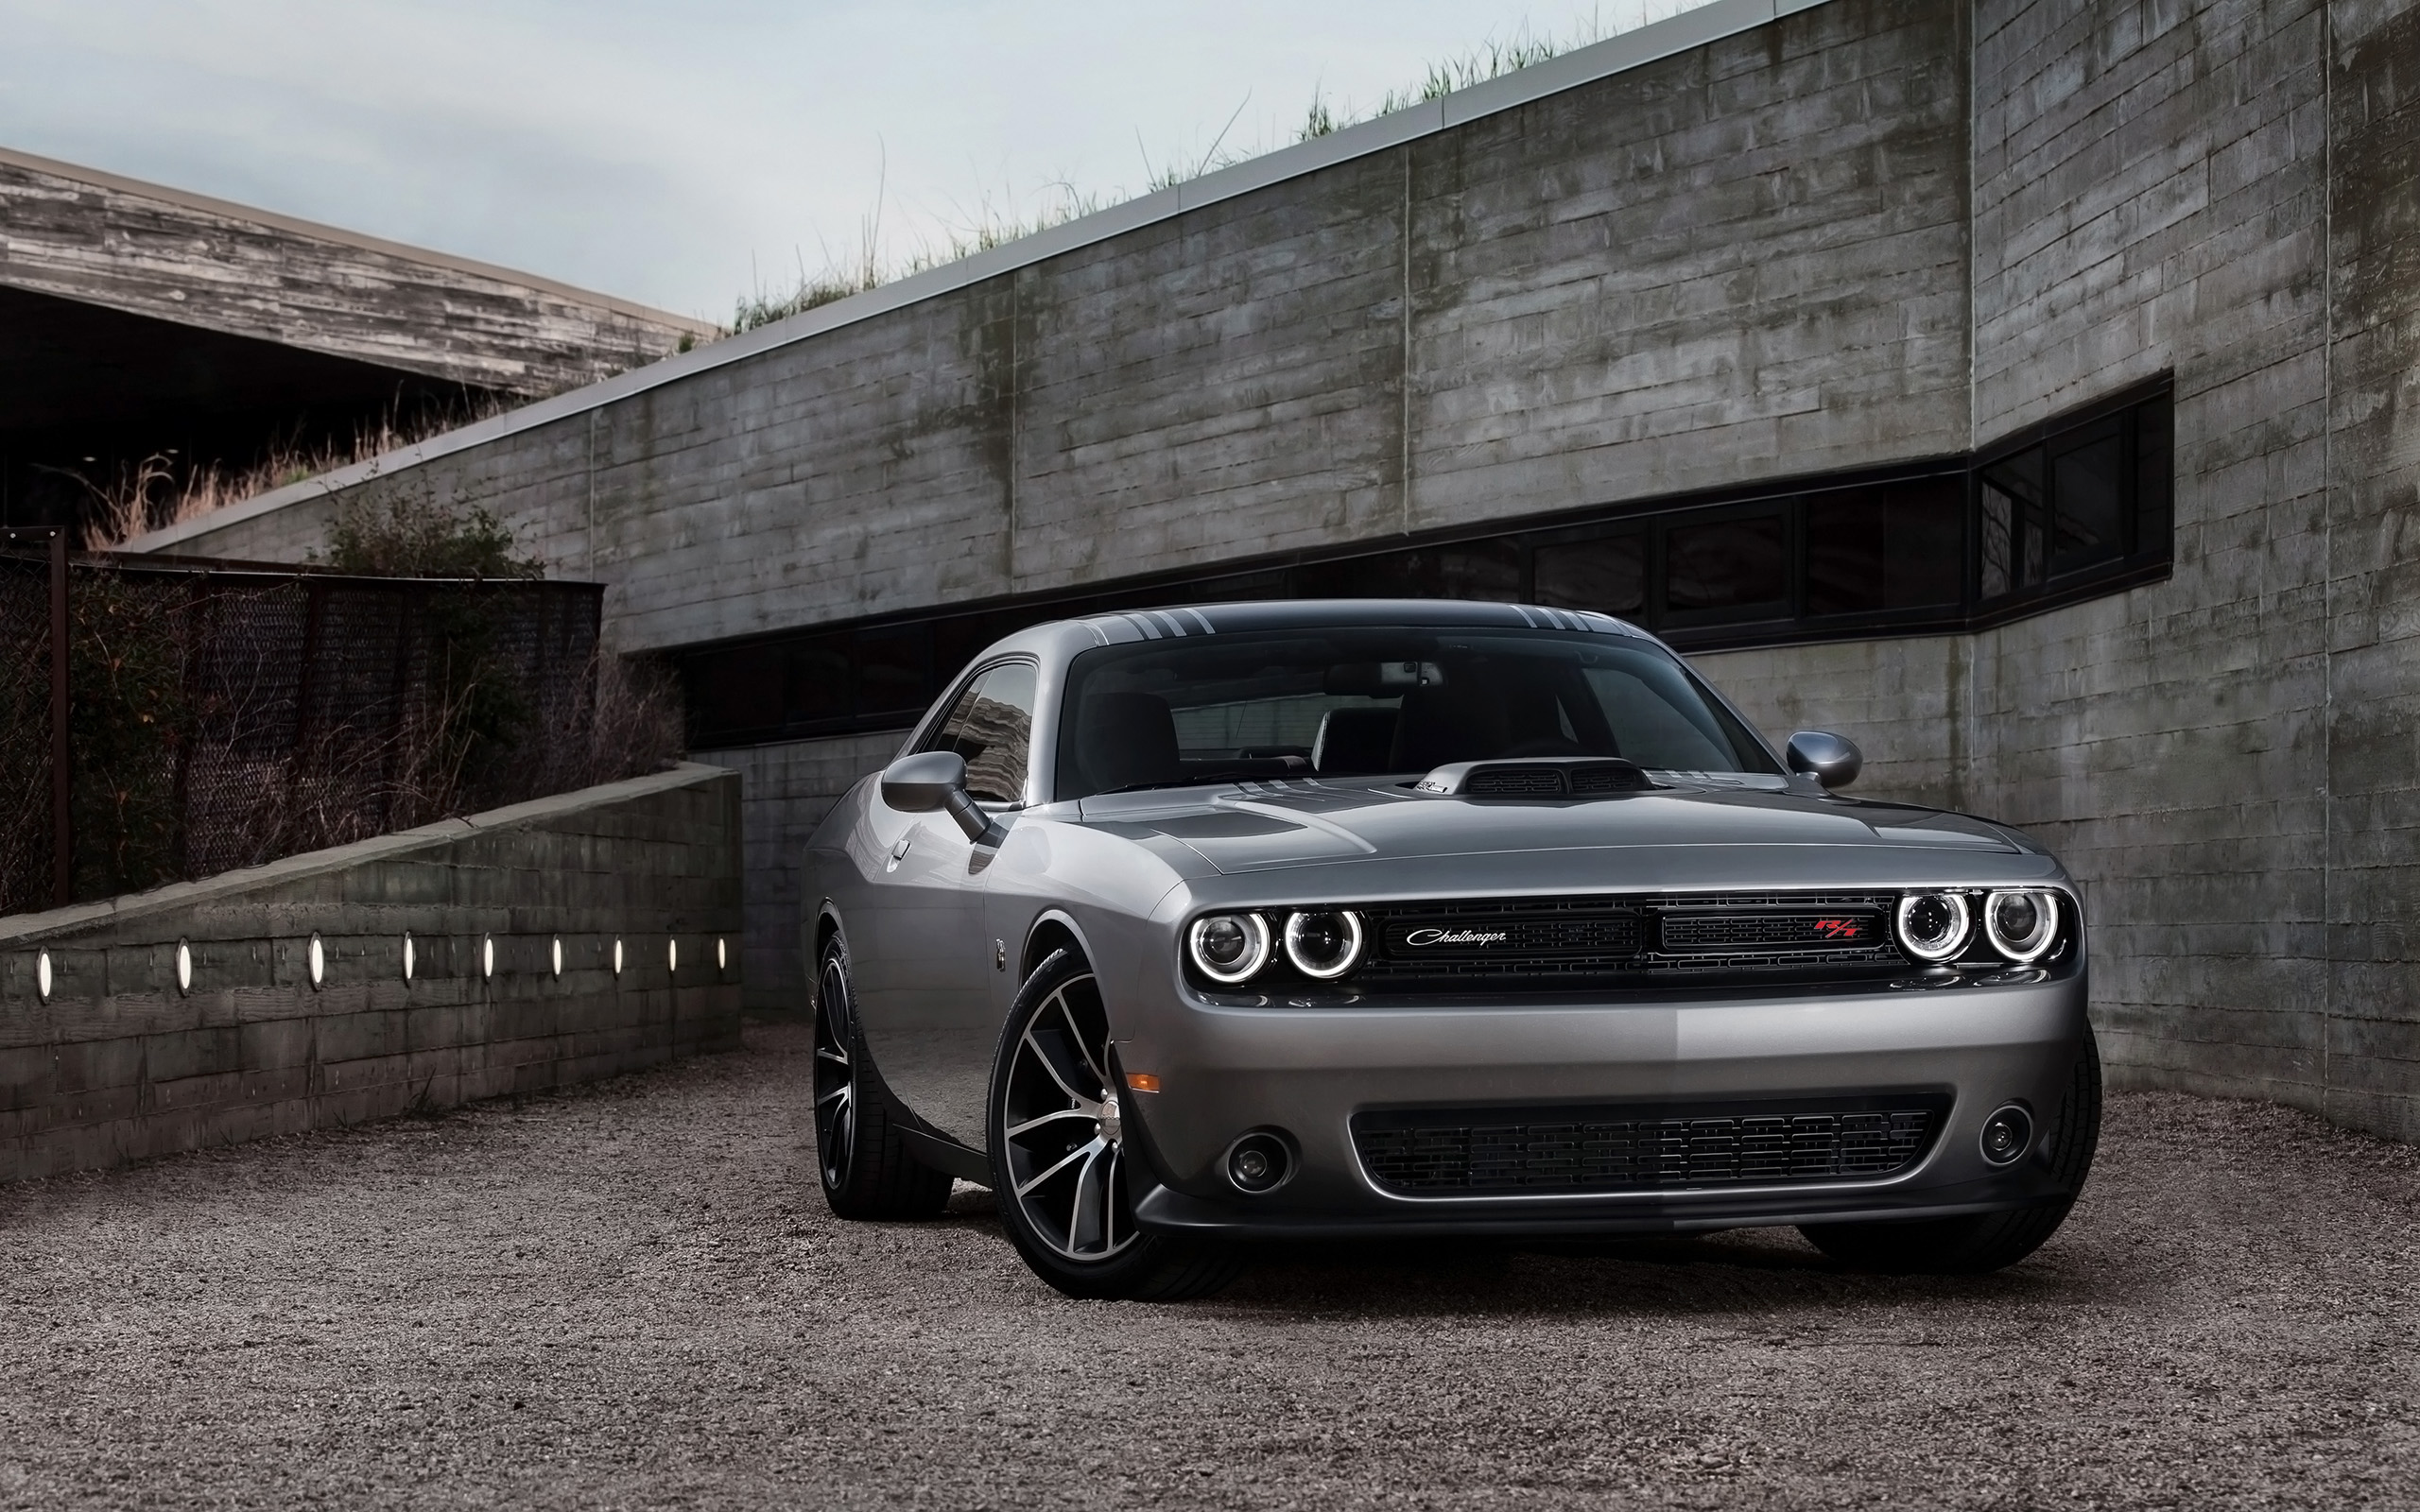 2015 Dodge Challenger Silver Wallpaper | HD Car Wallpapers | ID #4404